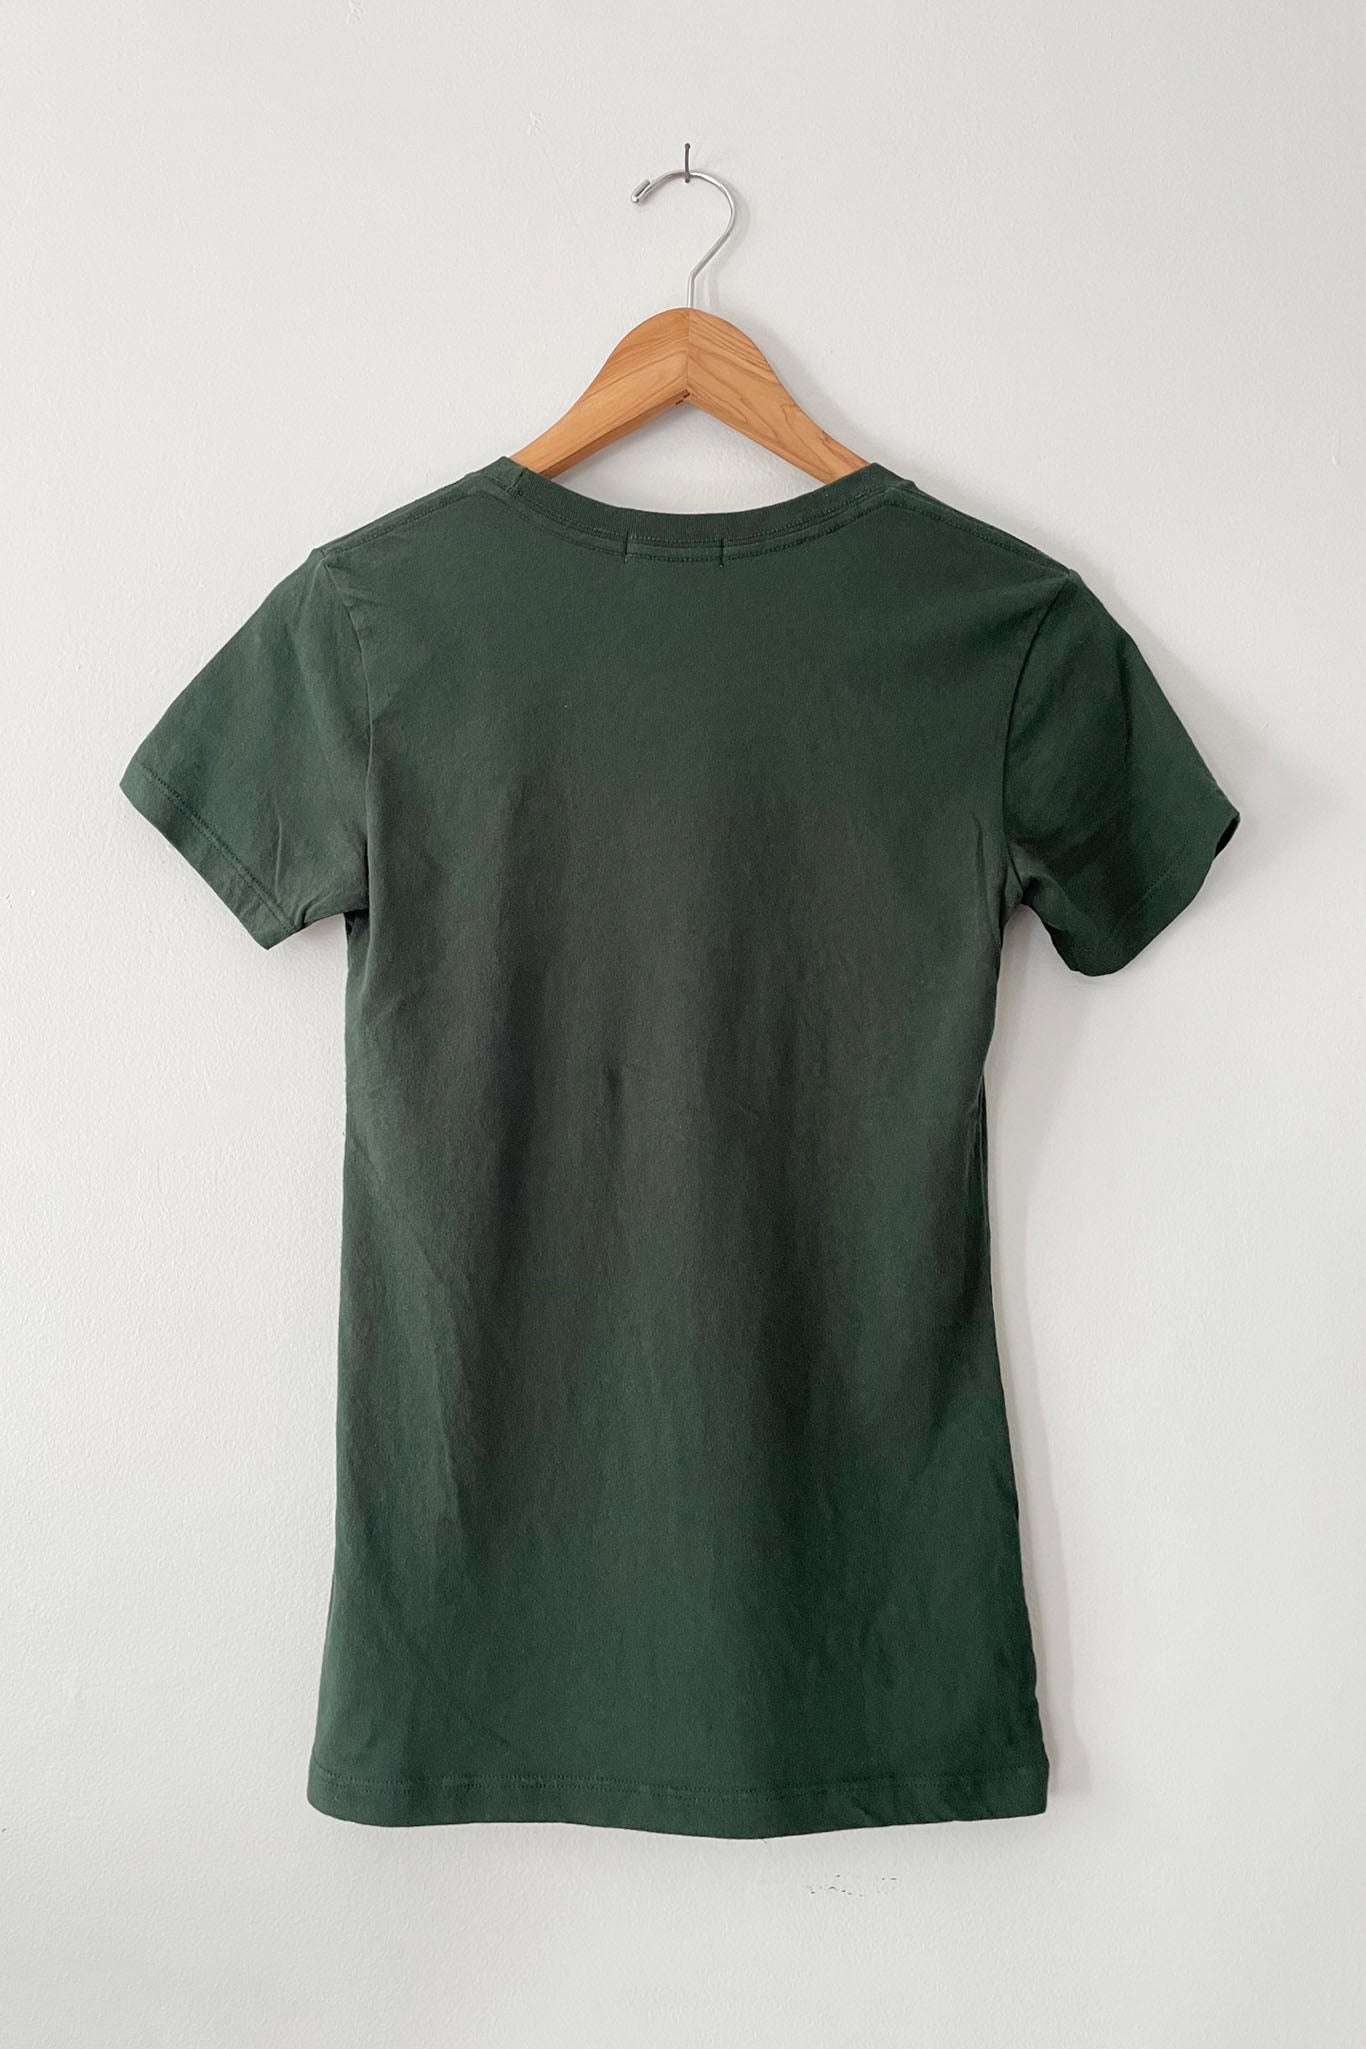 Easy Cotton crewneck tee shirt perfect for summer.